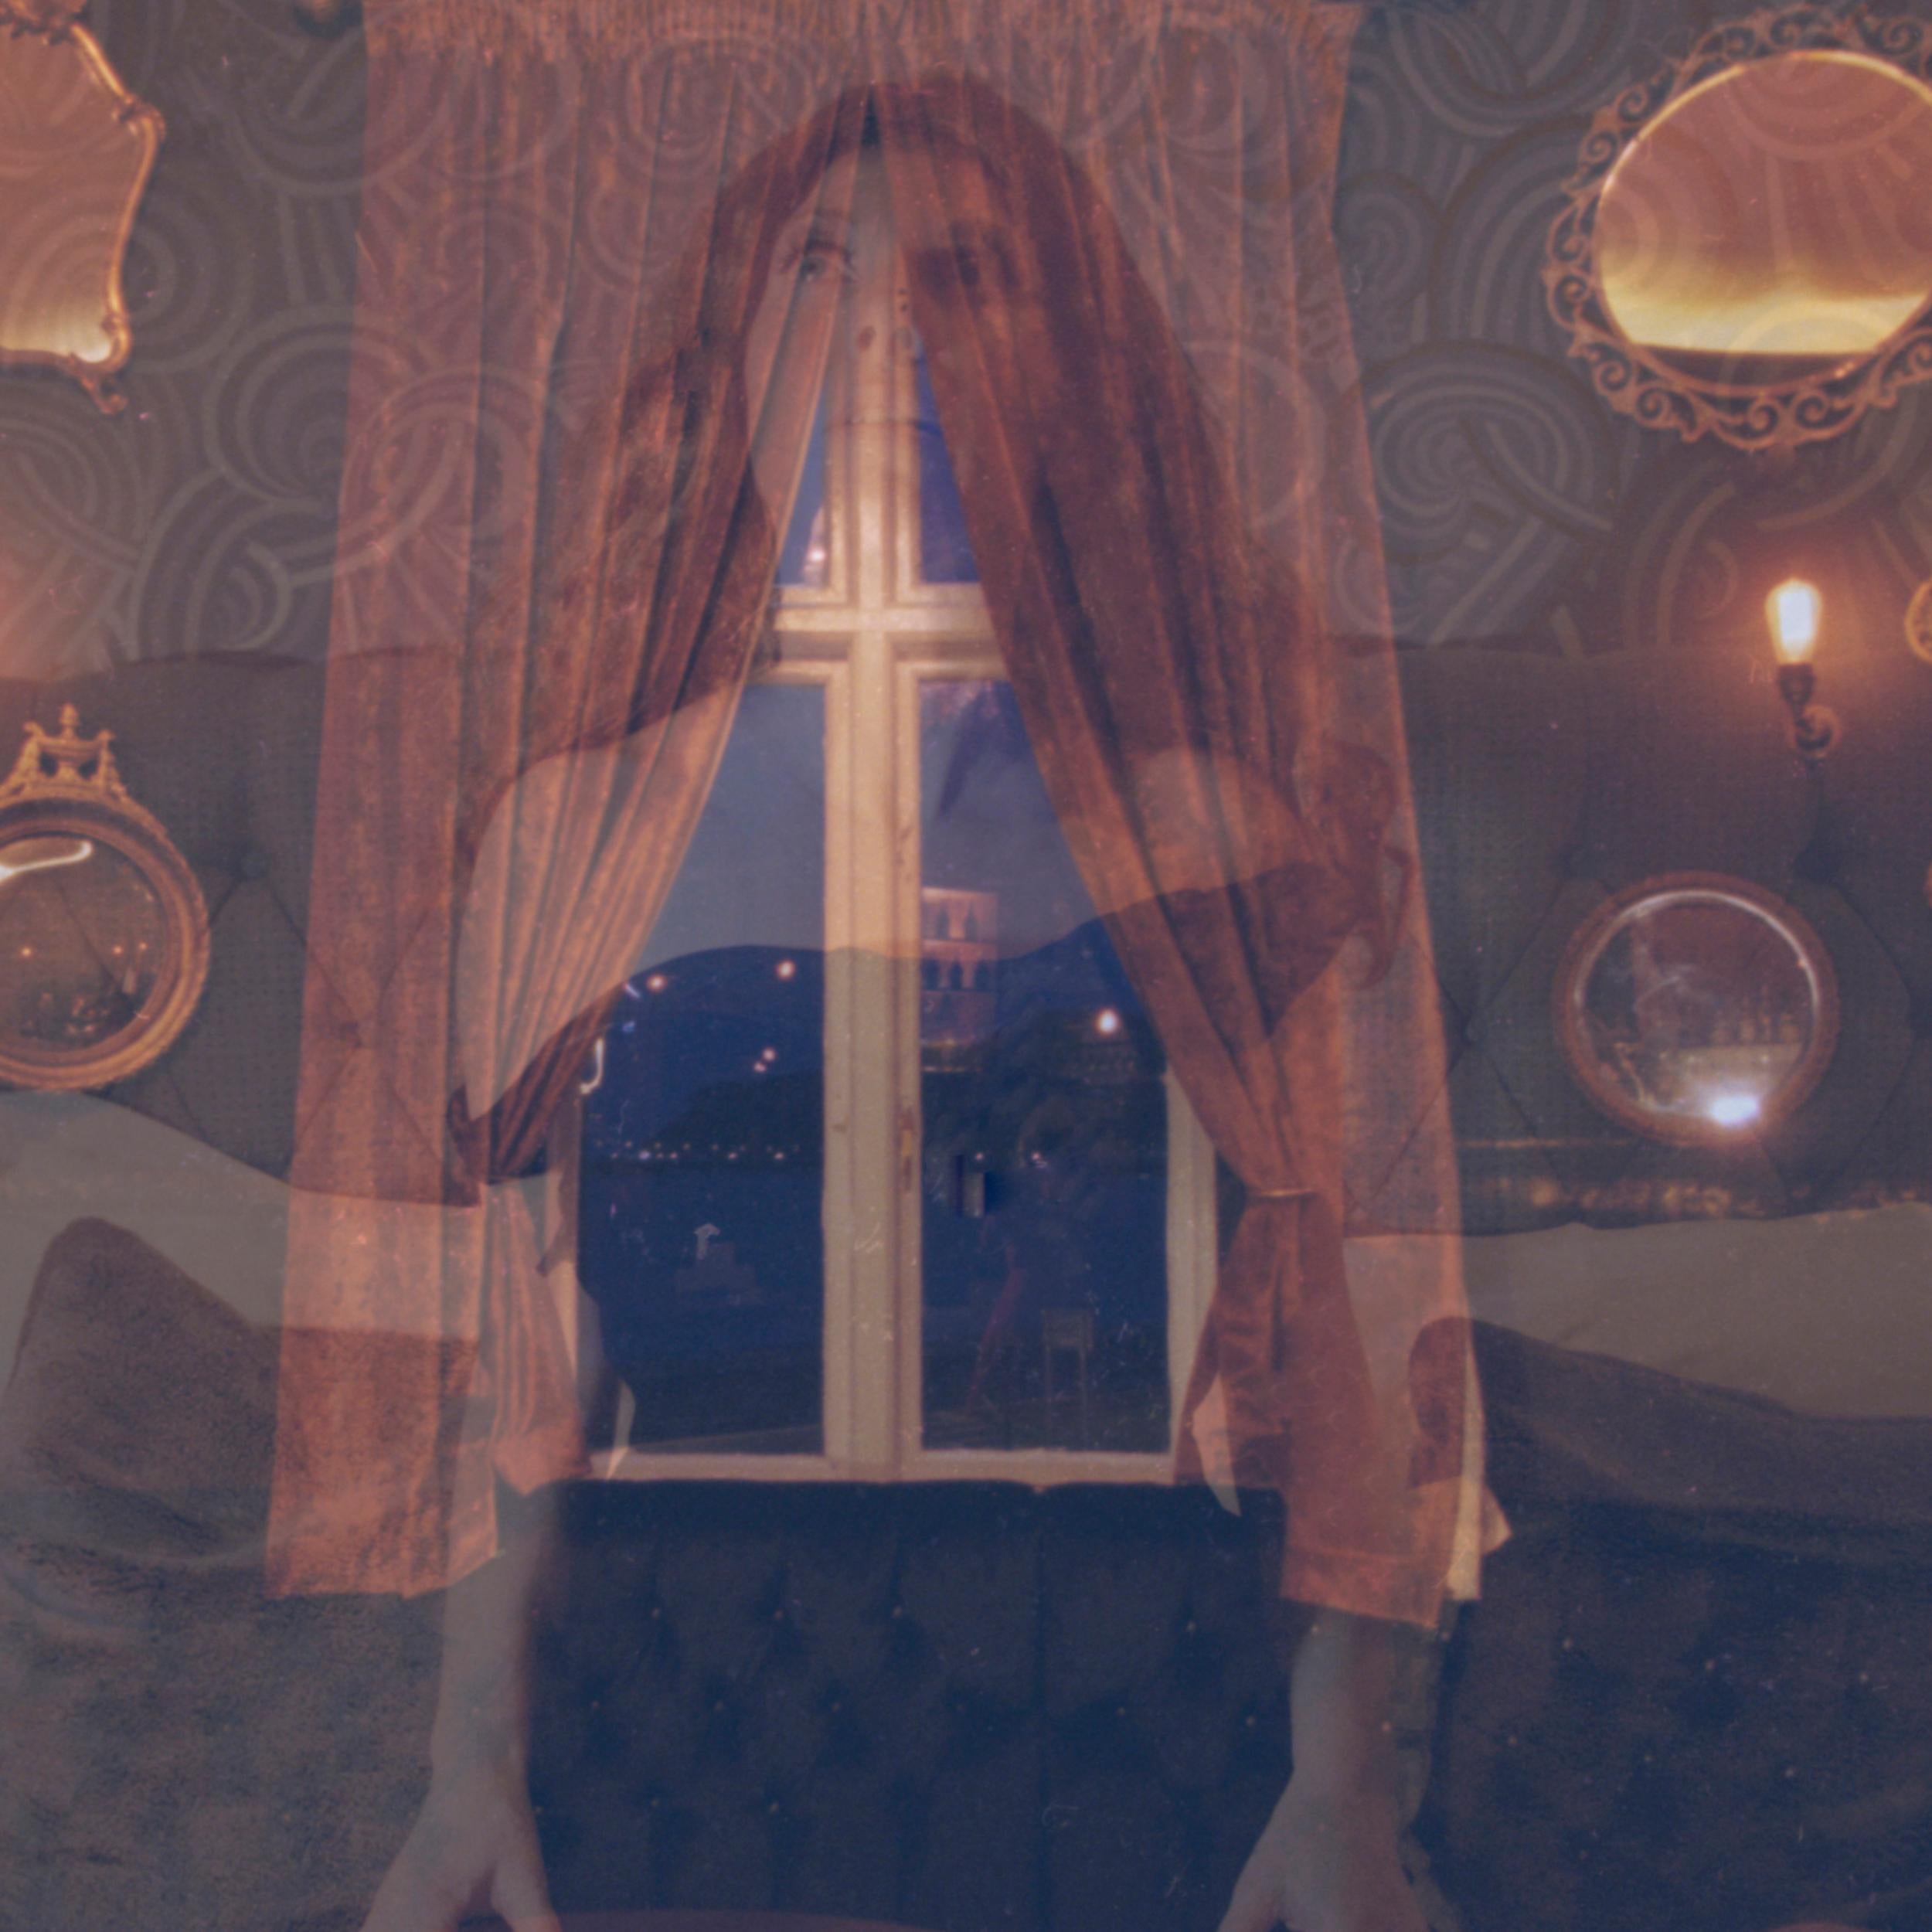 Clare Marie Bailey Color Photograph – Visions at the Mirrored Palace - Contemporary, Polaroid, Frau, Psychiatrie